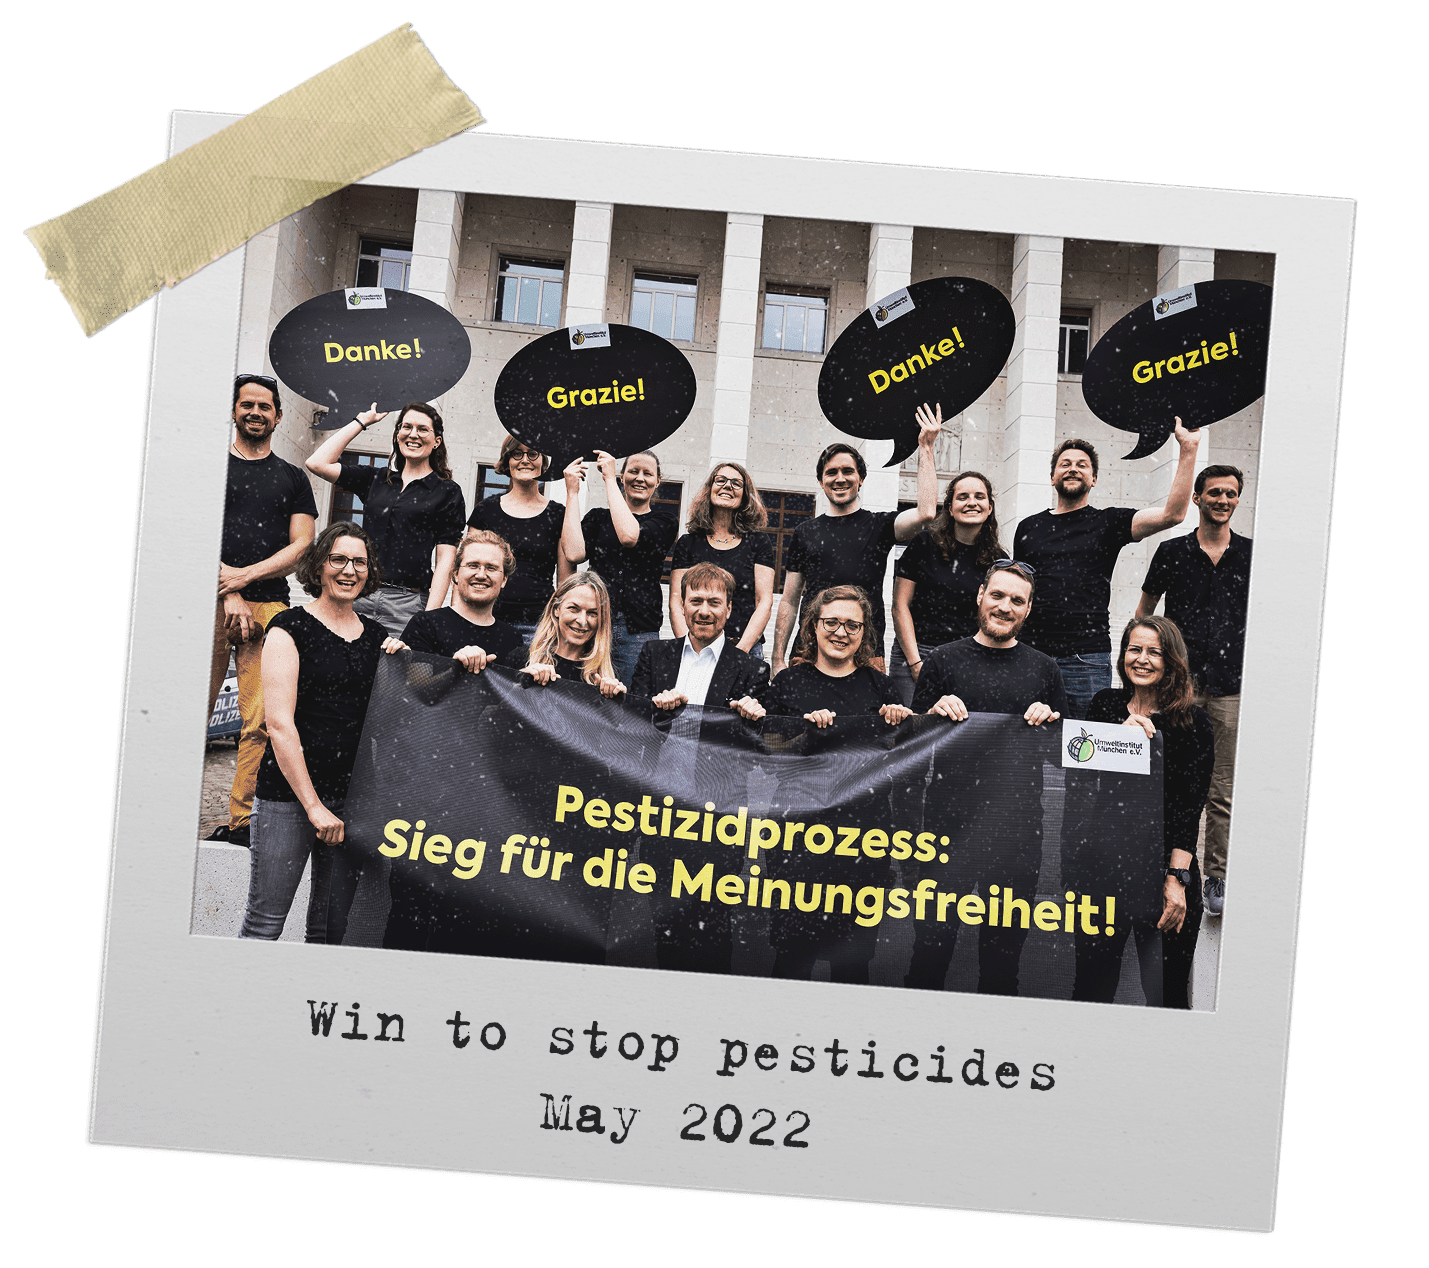 Two rows of people wearing black t shirts stand in front of building. Front row (7 people) hold banner, back row (9) people hold speech bubble-shaped signs saying Thank You in different languages.